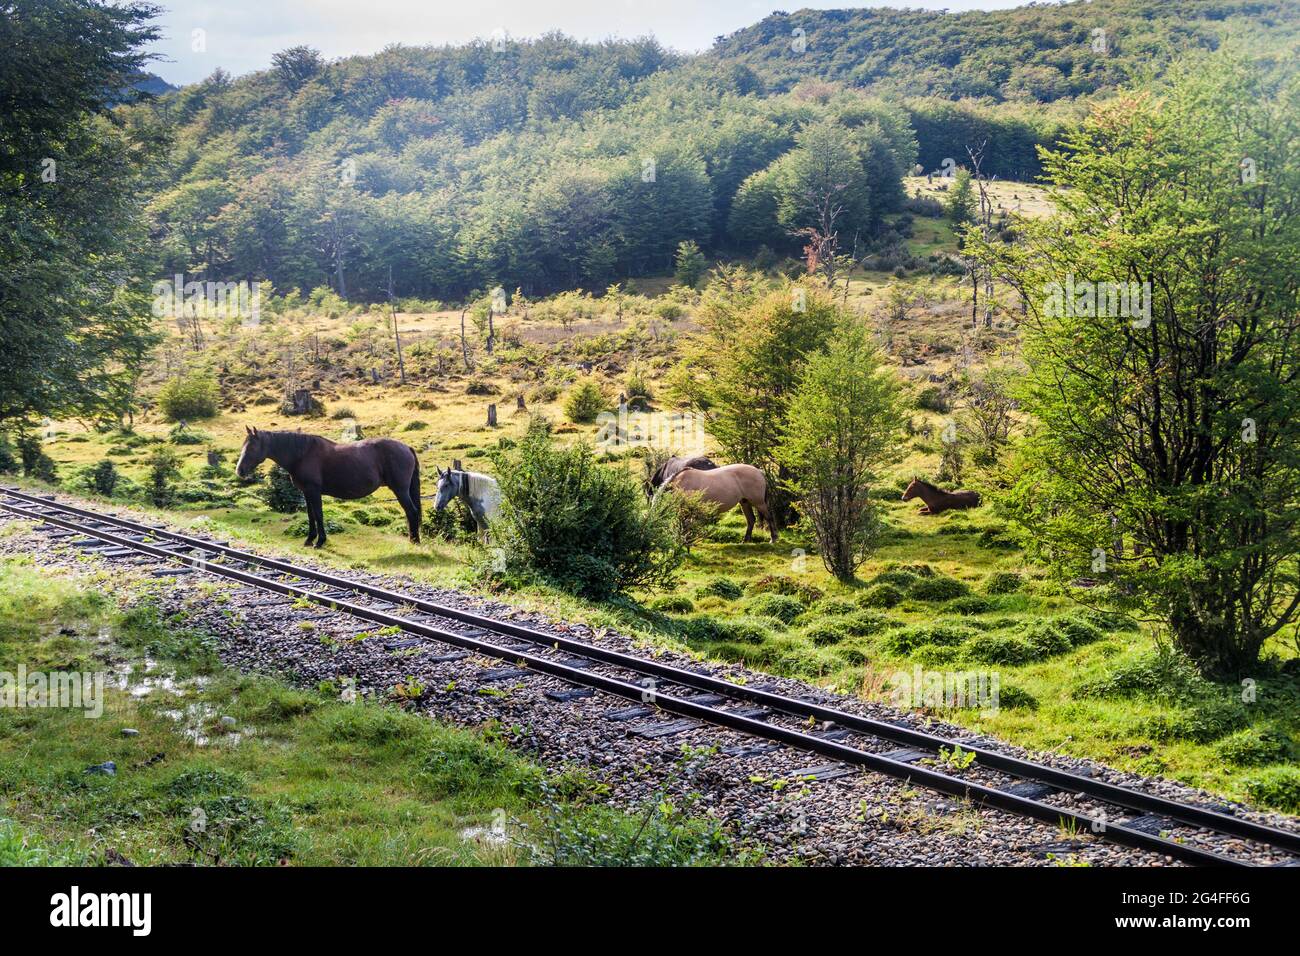 Horses and a railway in National Park Tierra del Fuego, Argentina Stock Photo